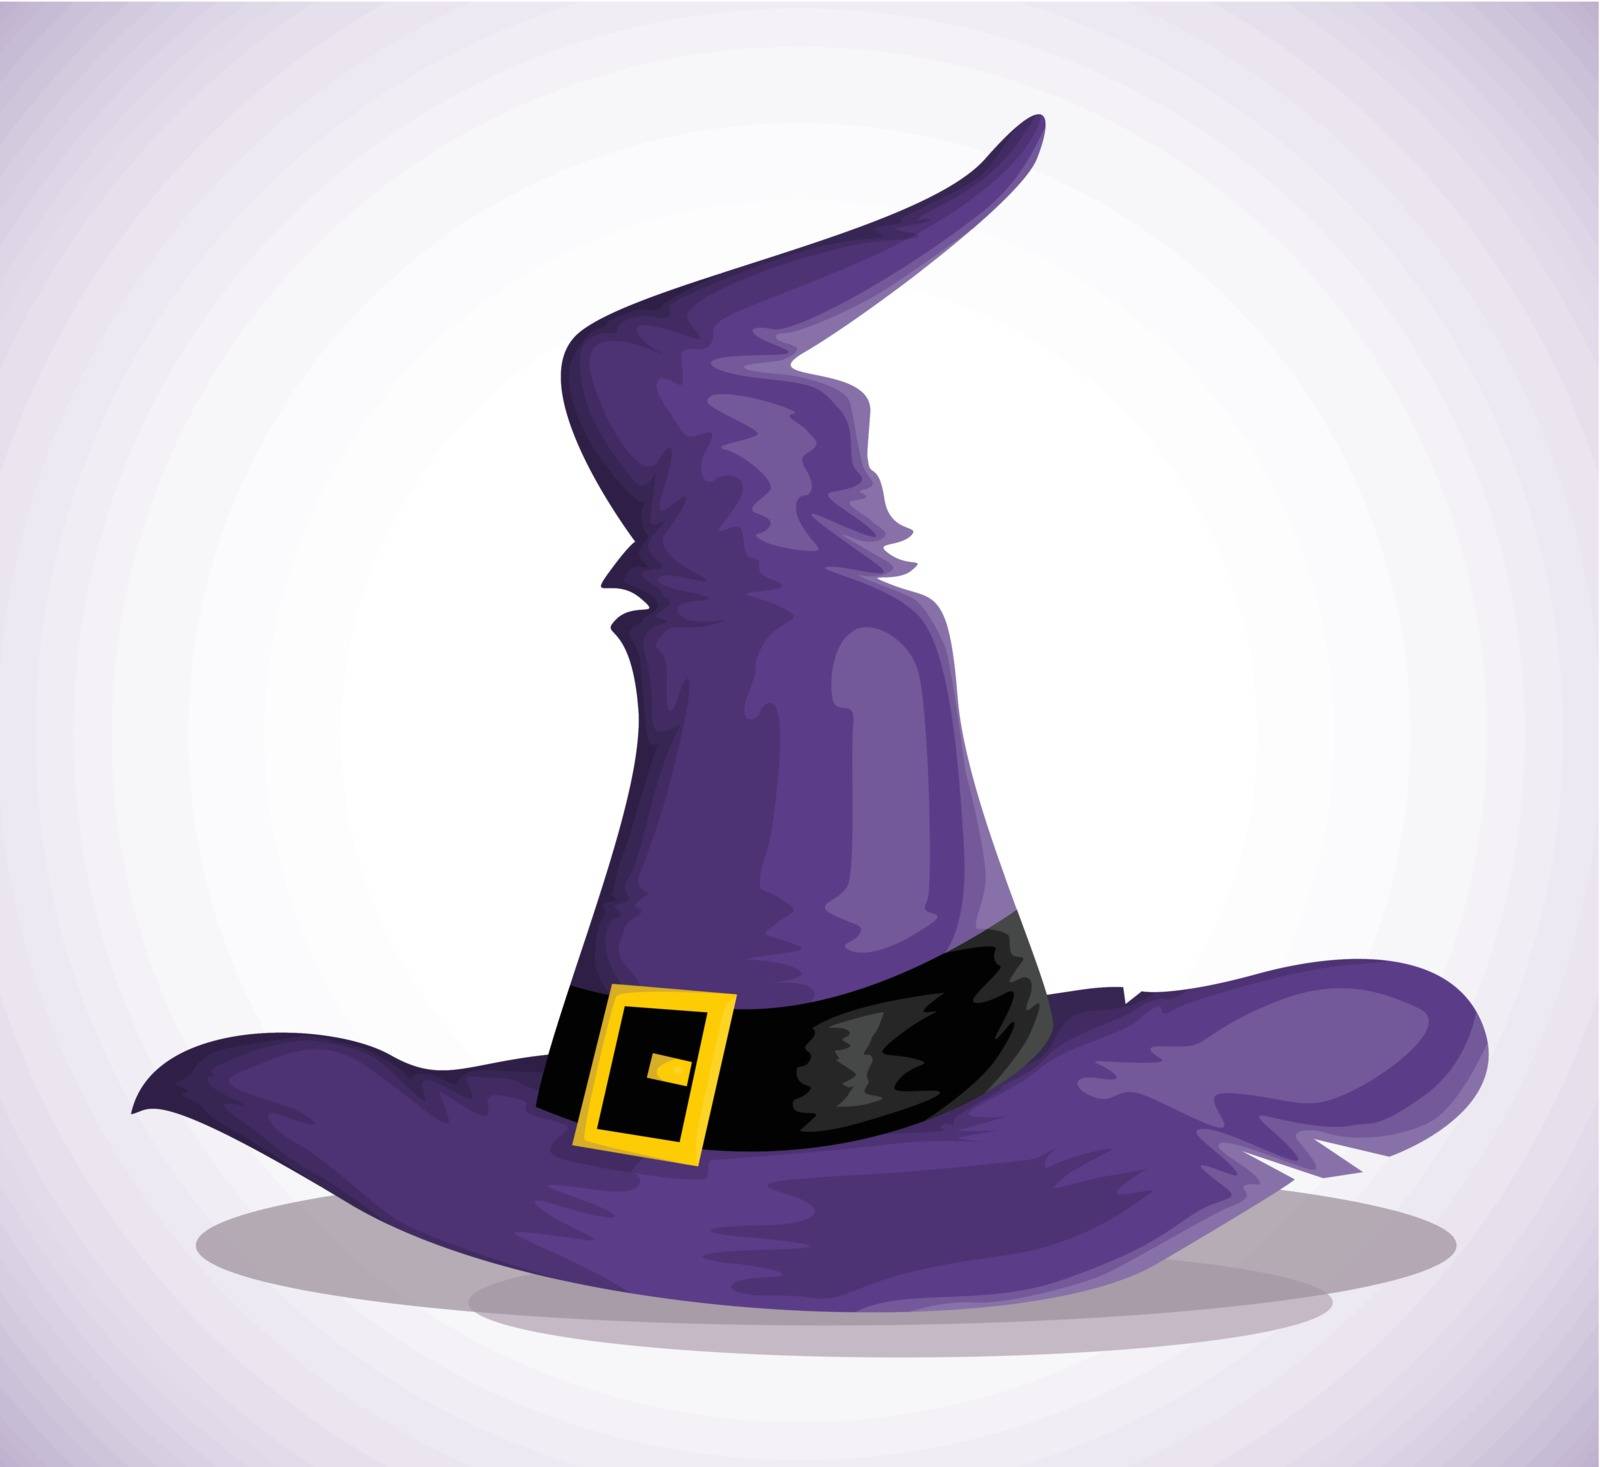 Witch hat by robin2